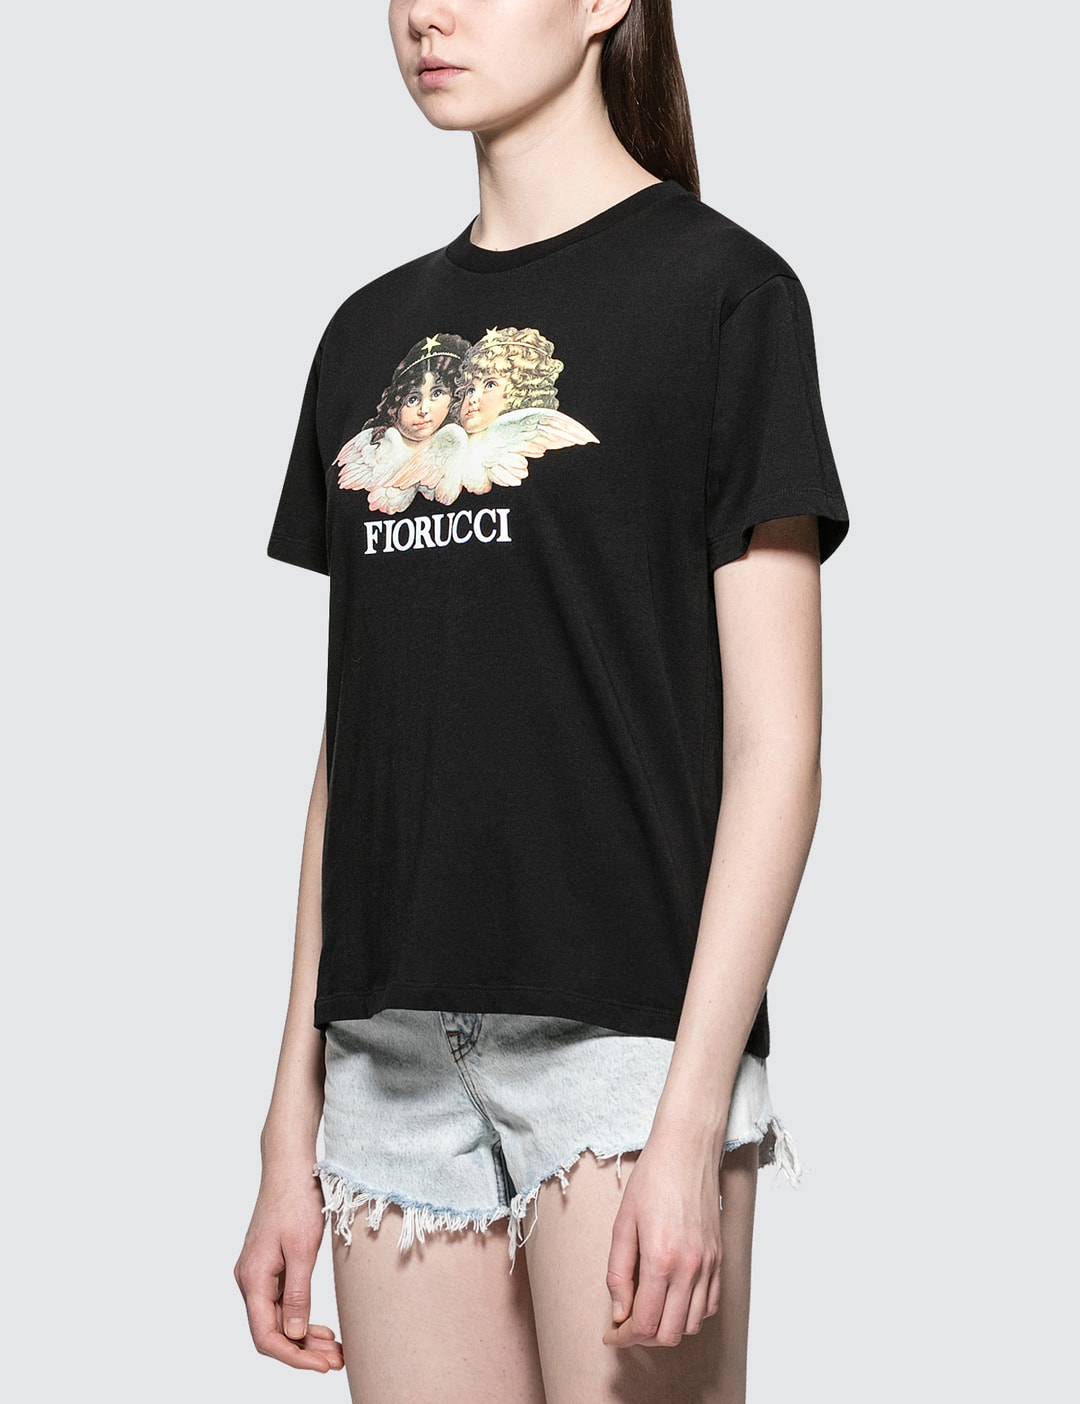 Fiorucci - Vintage Angels Short Sleeve T-shirt | HBX - Globally Curated ...